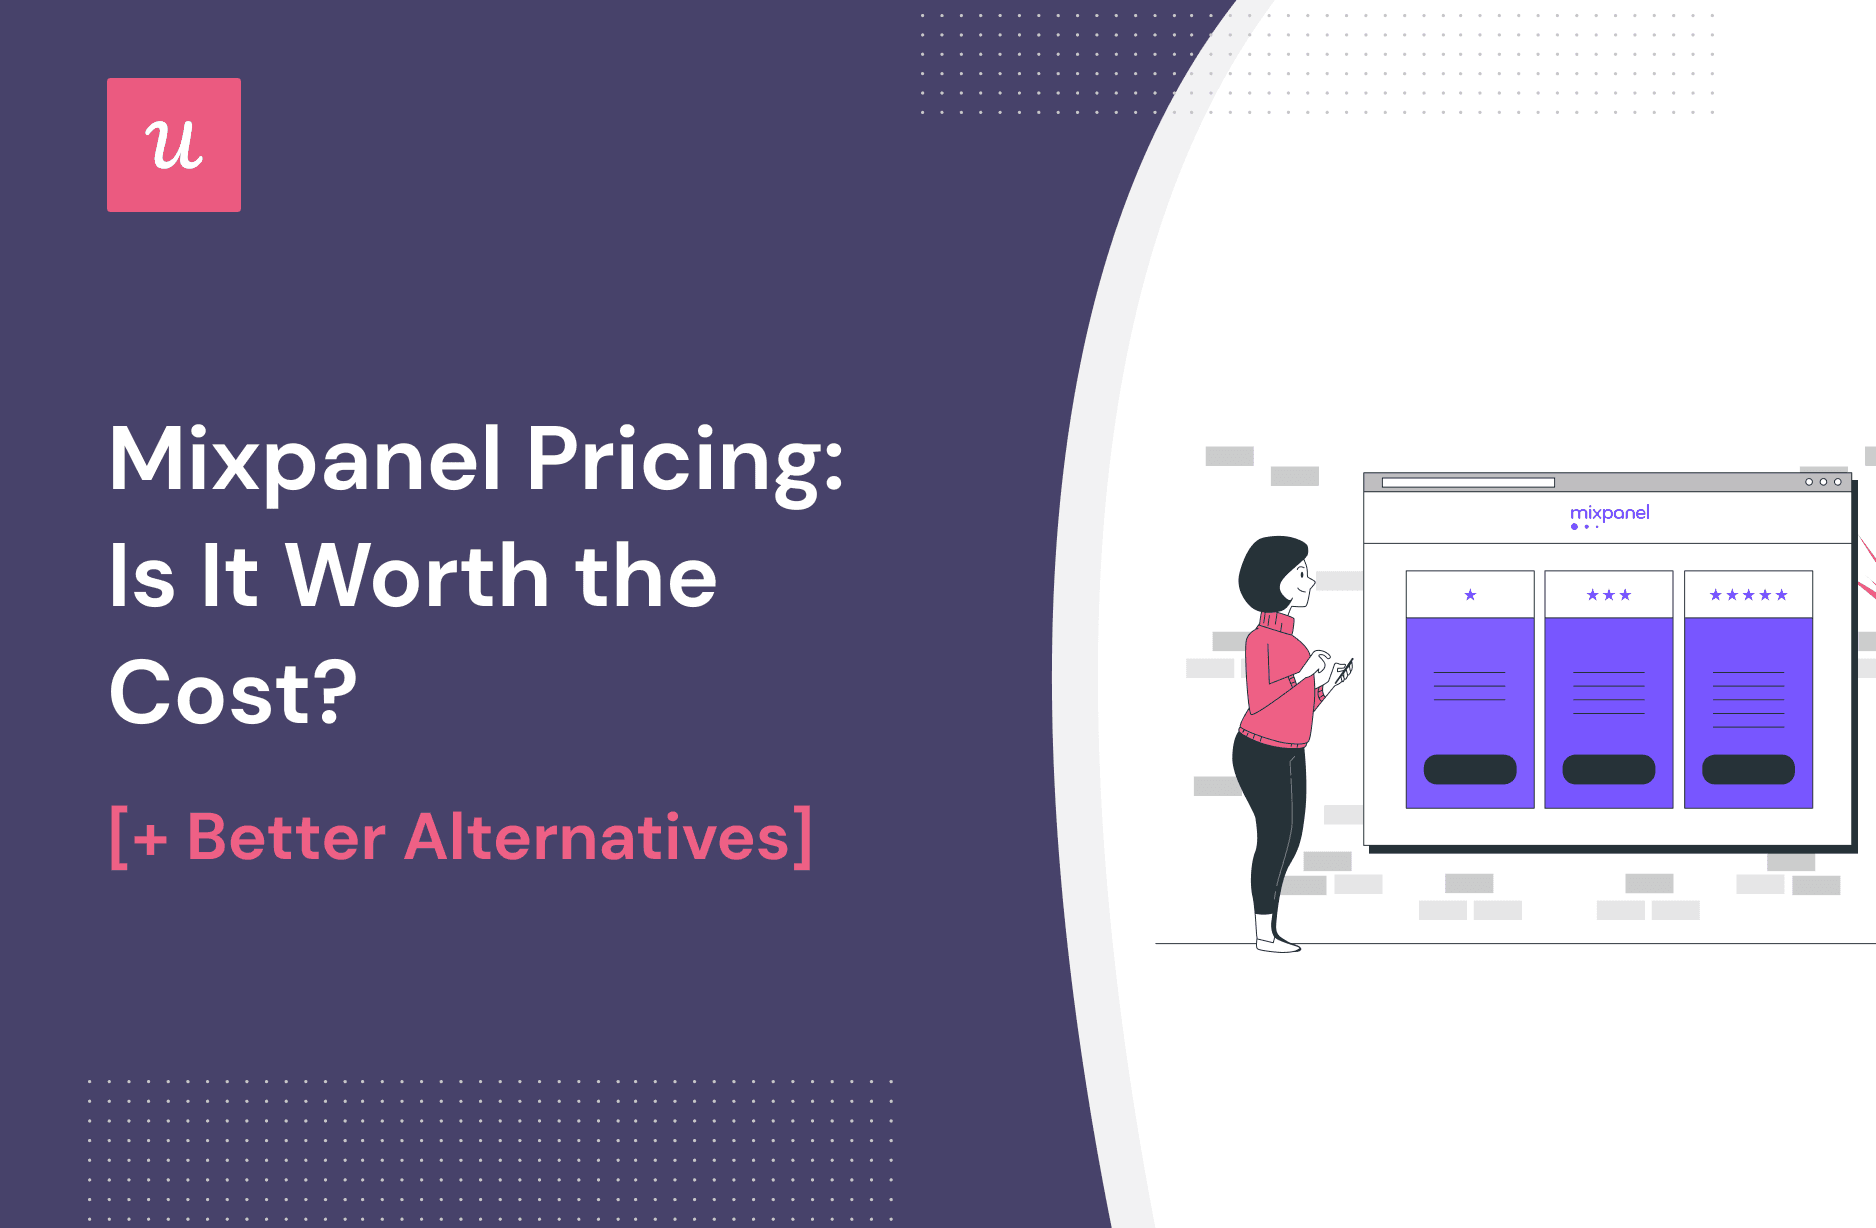 Mixpanel Pricing: Is It Worth the Cost? (+ Better Alternatives) cover